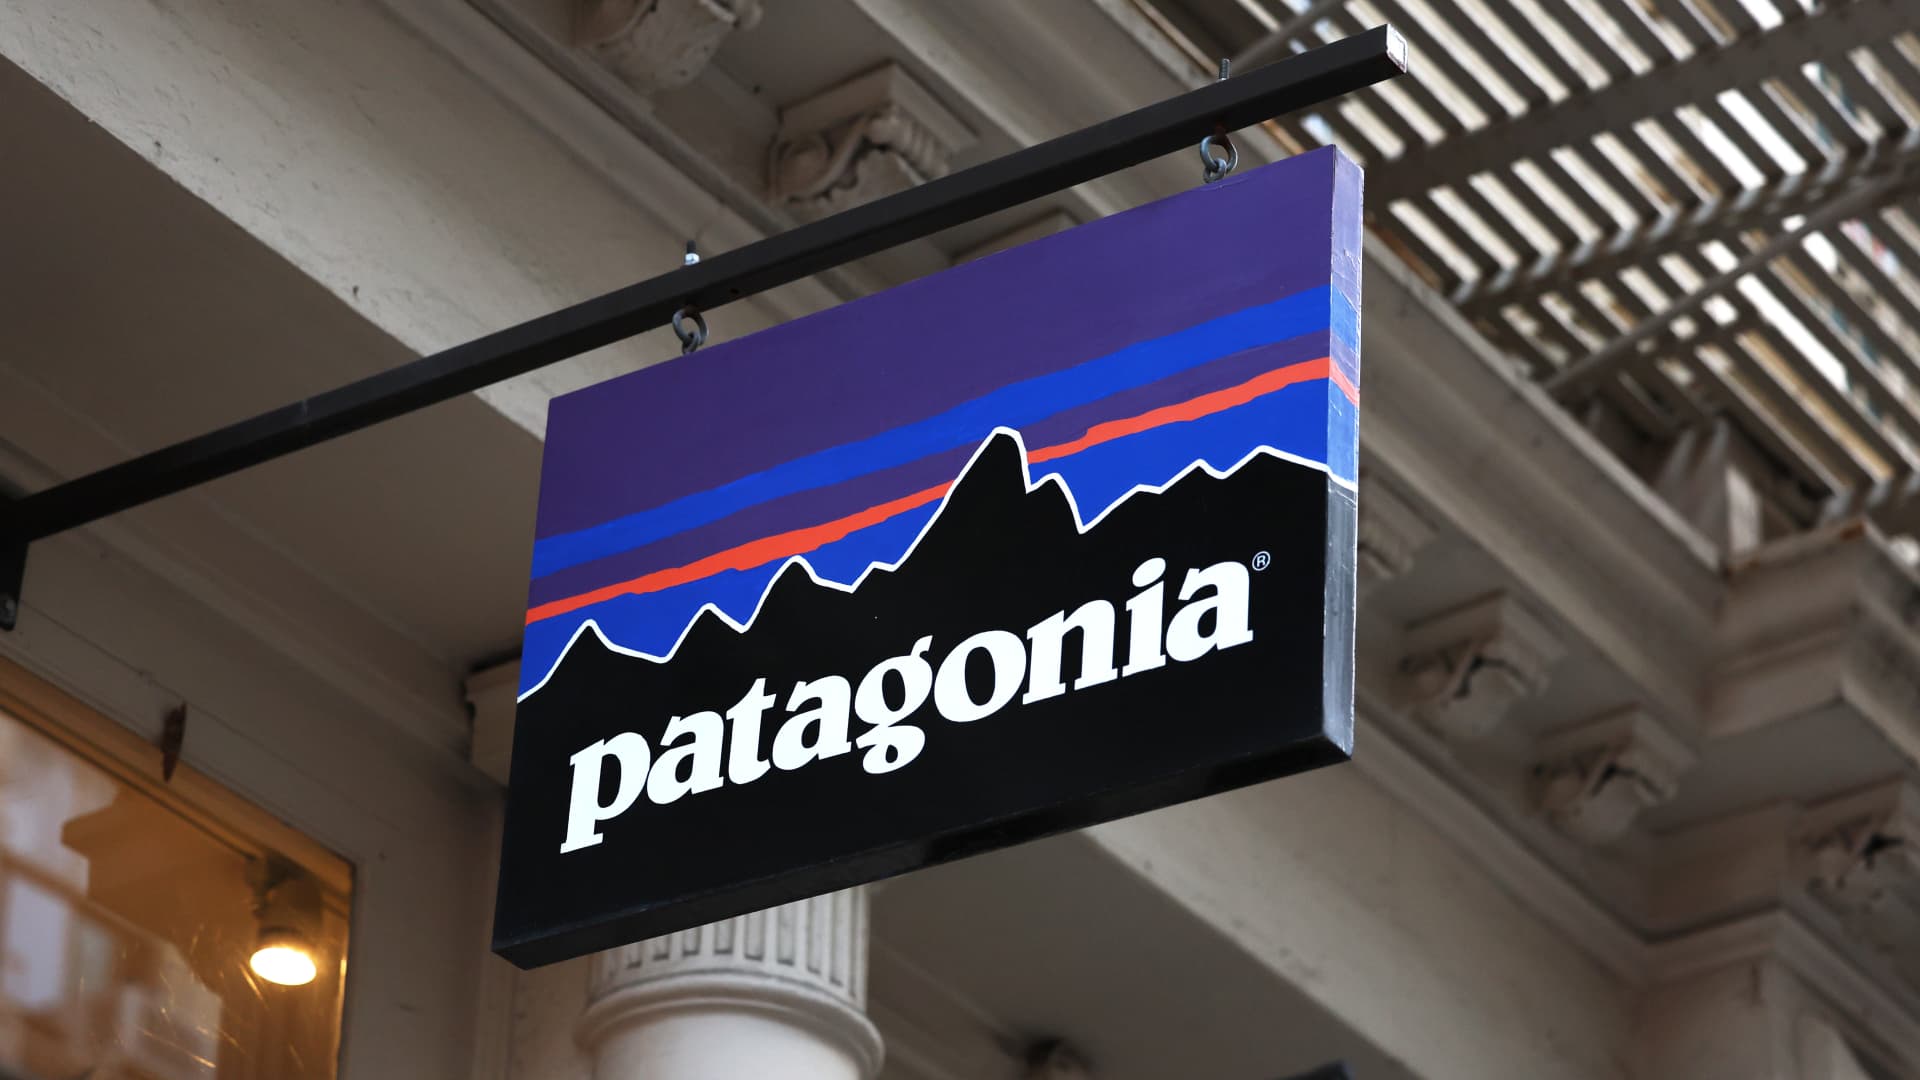 Patagonia must remain competitive for climate donation to work: CEO